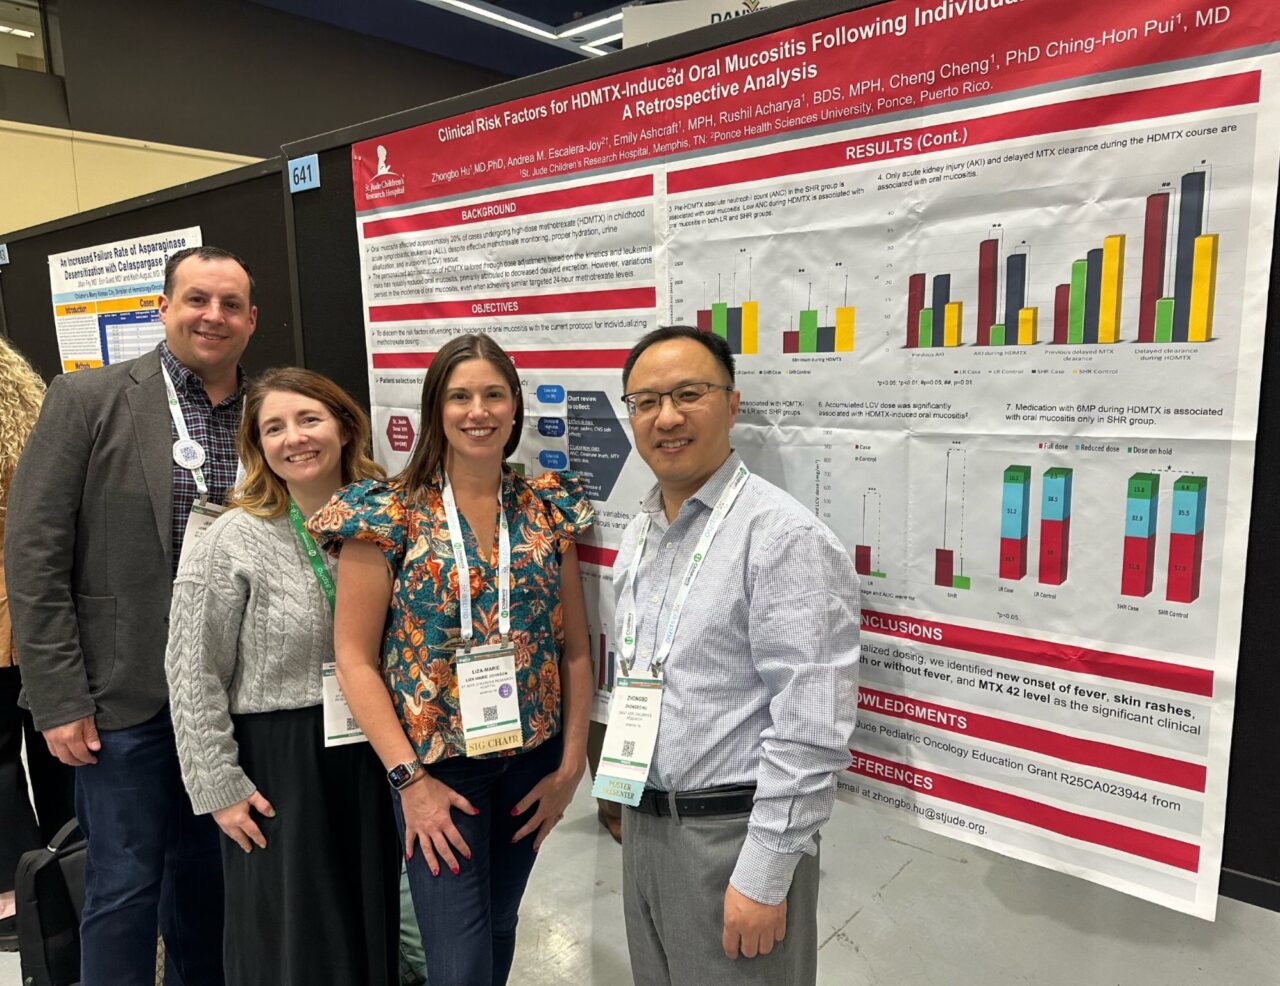 Liza-Marie Johnson: St. Jude Children’s Research Hospital hospitalist team recently attended the 2024 ASPHO meeting in Seattle